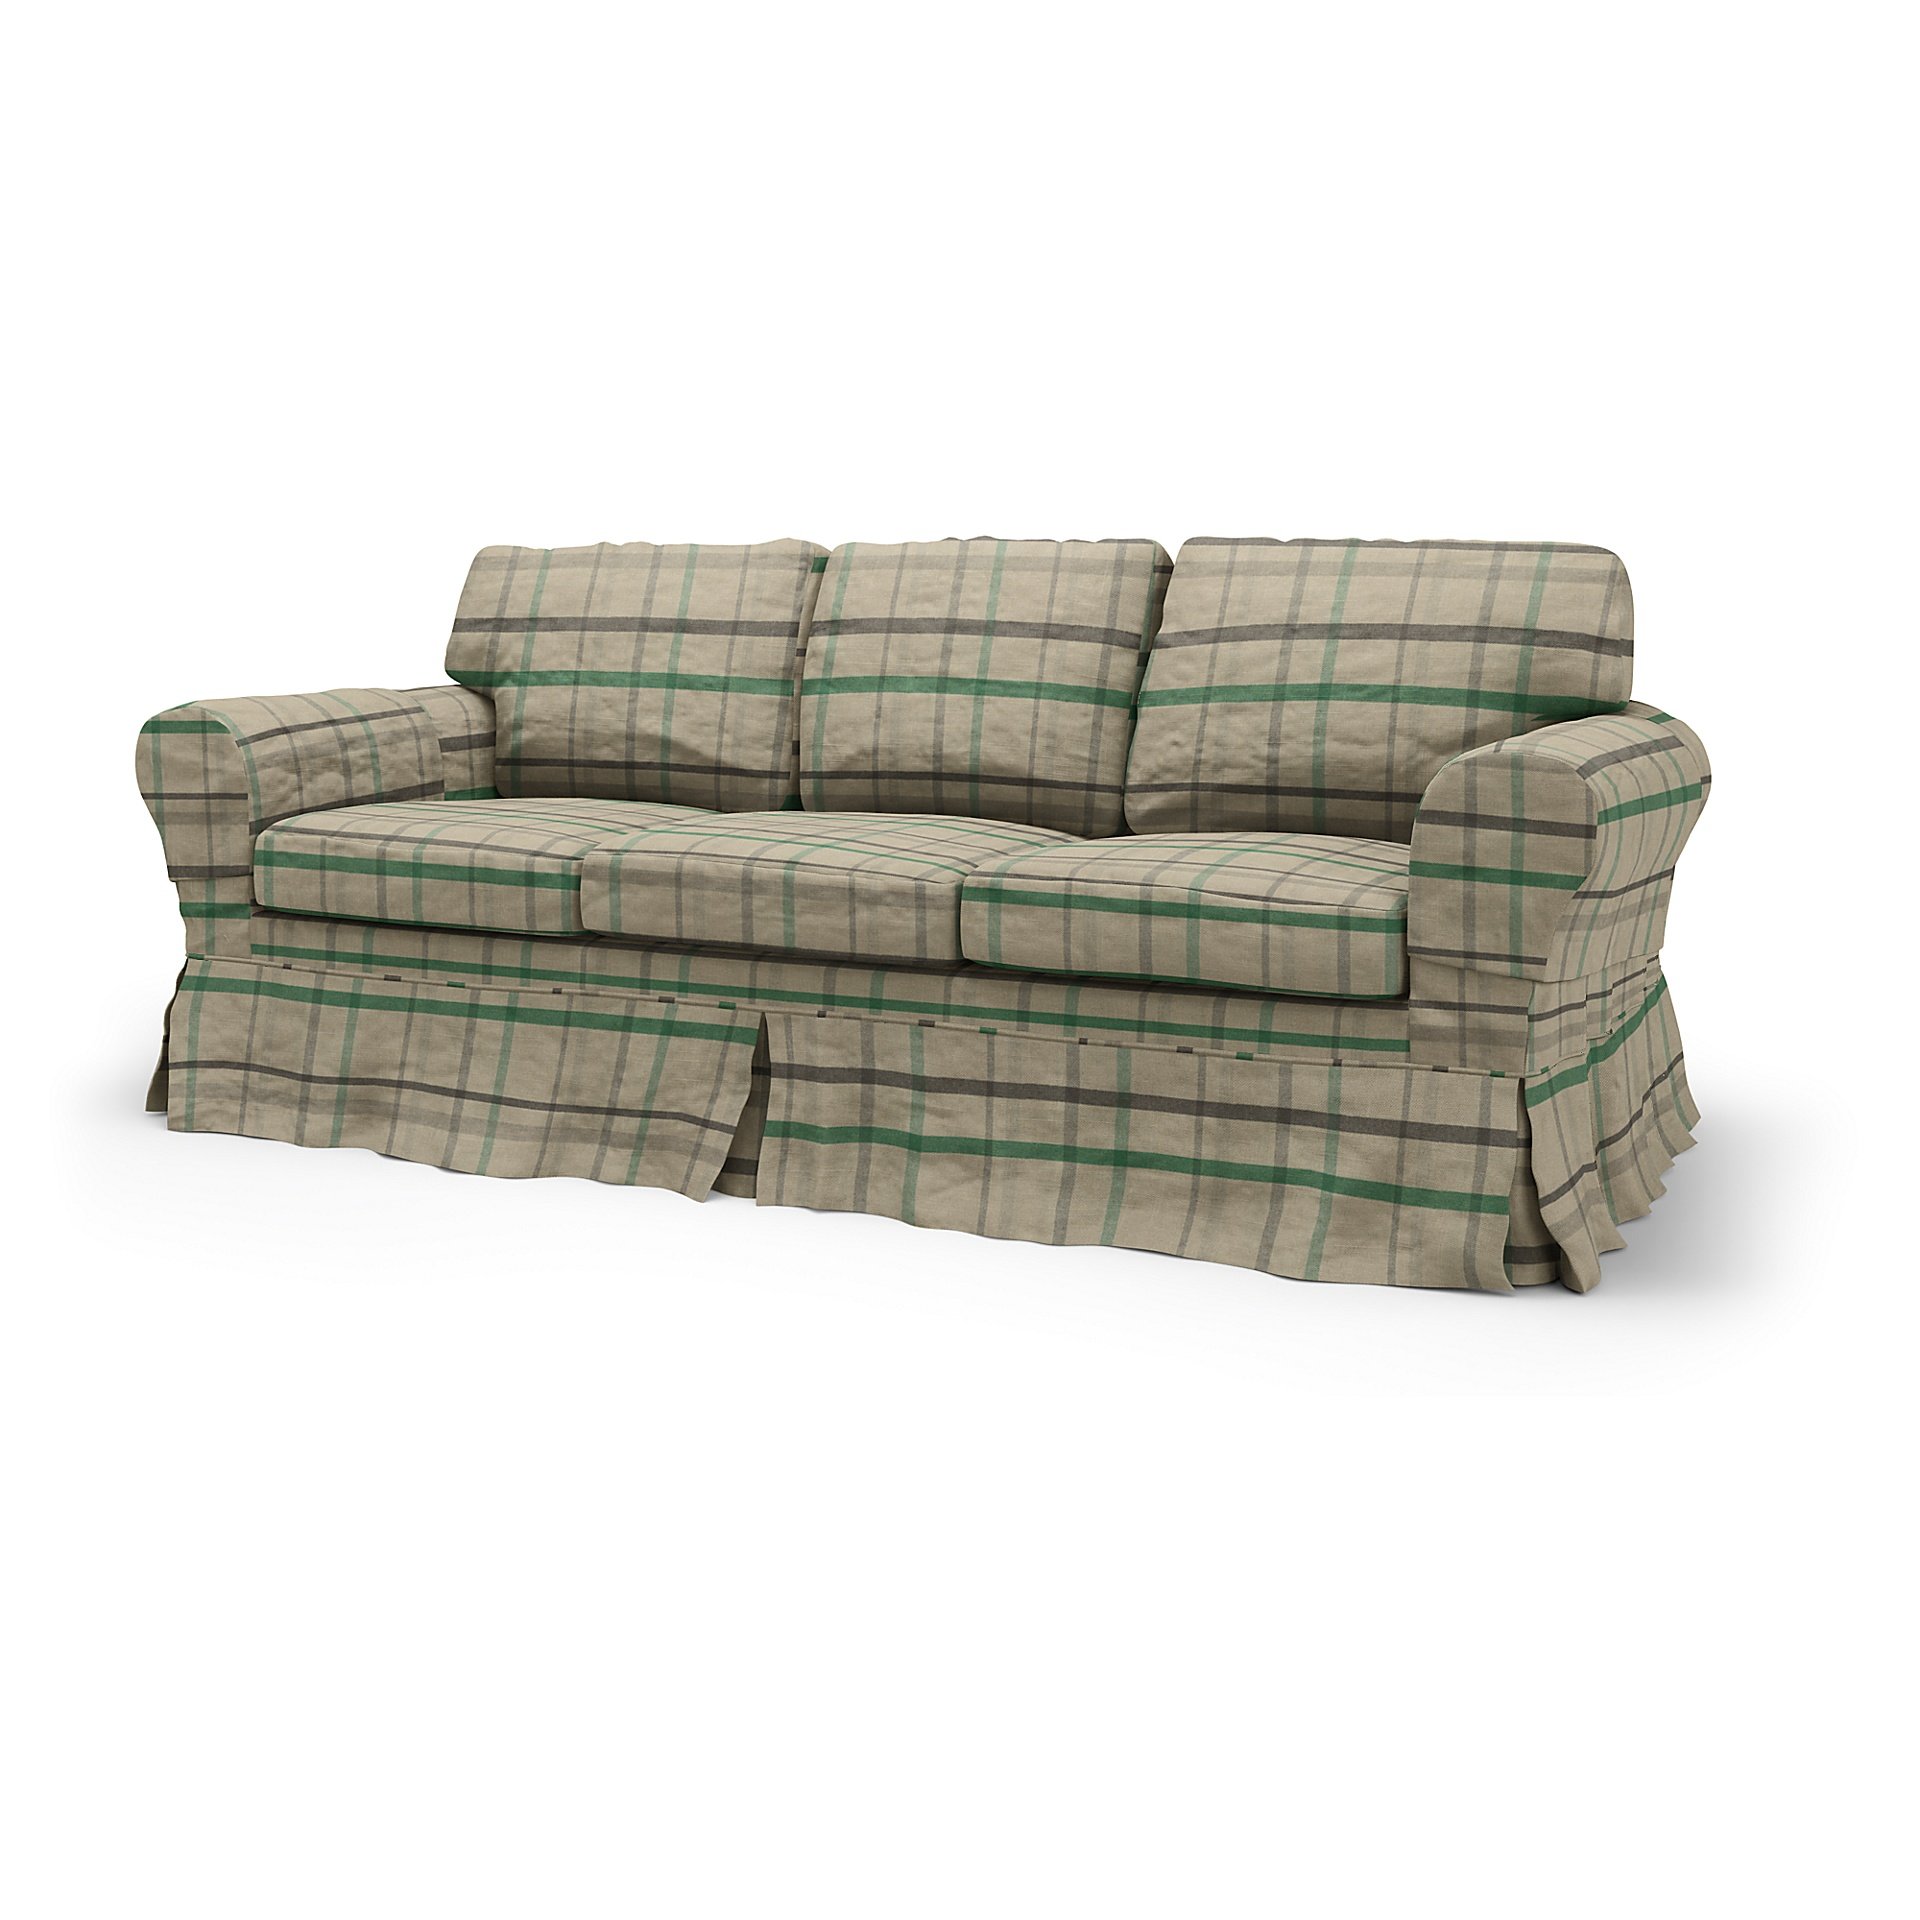 IKEA - Ektorp 3 Seater Sofa Bed Cover, Forest Glade, Wool - Bemz